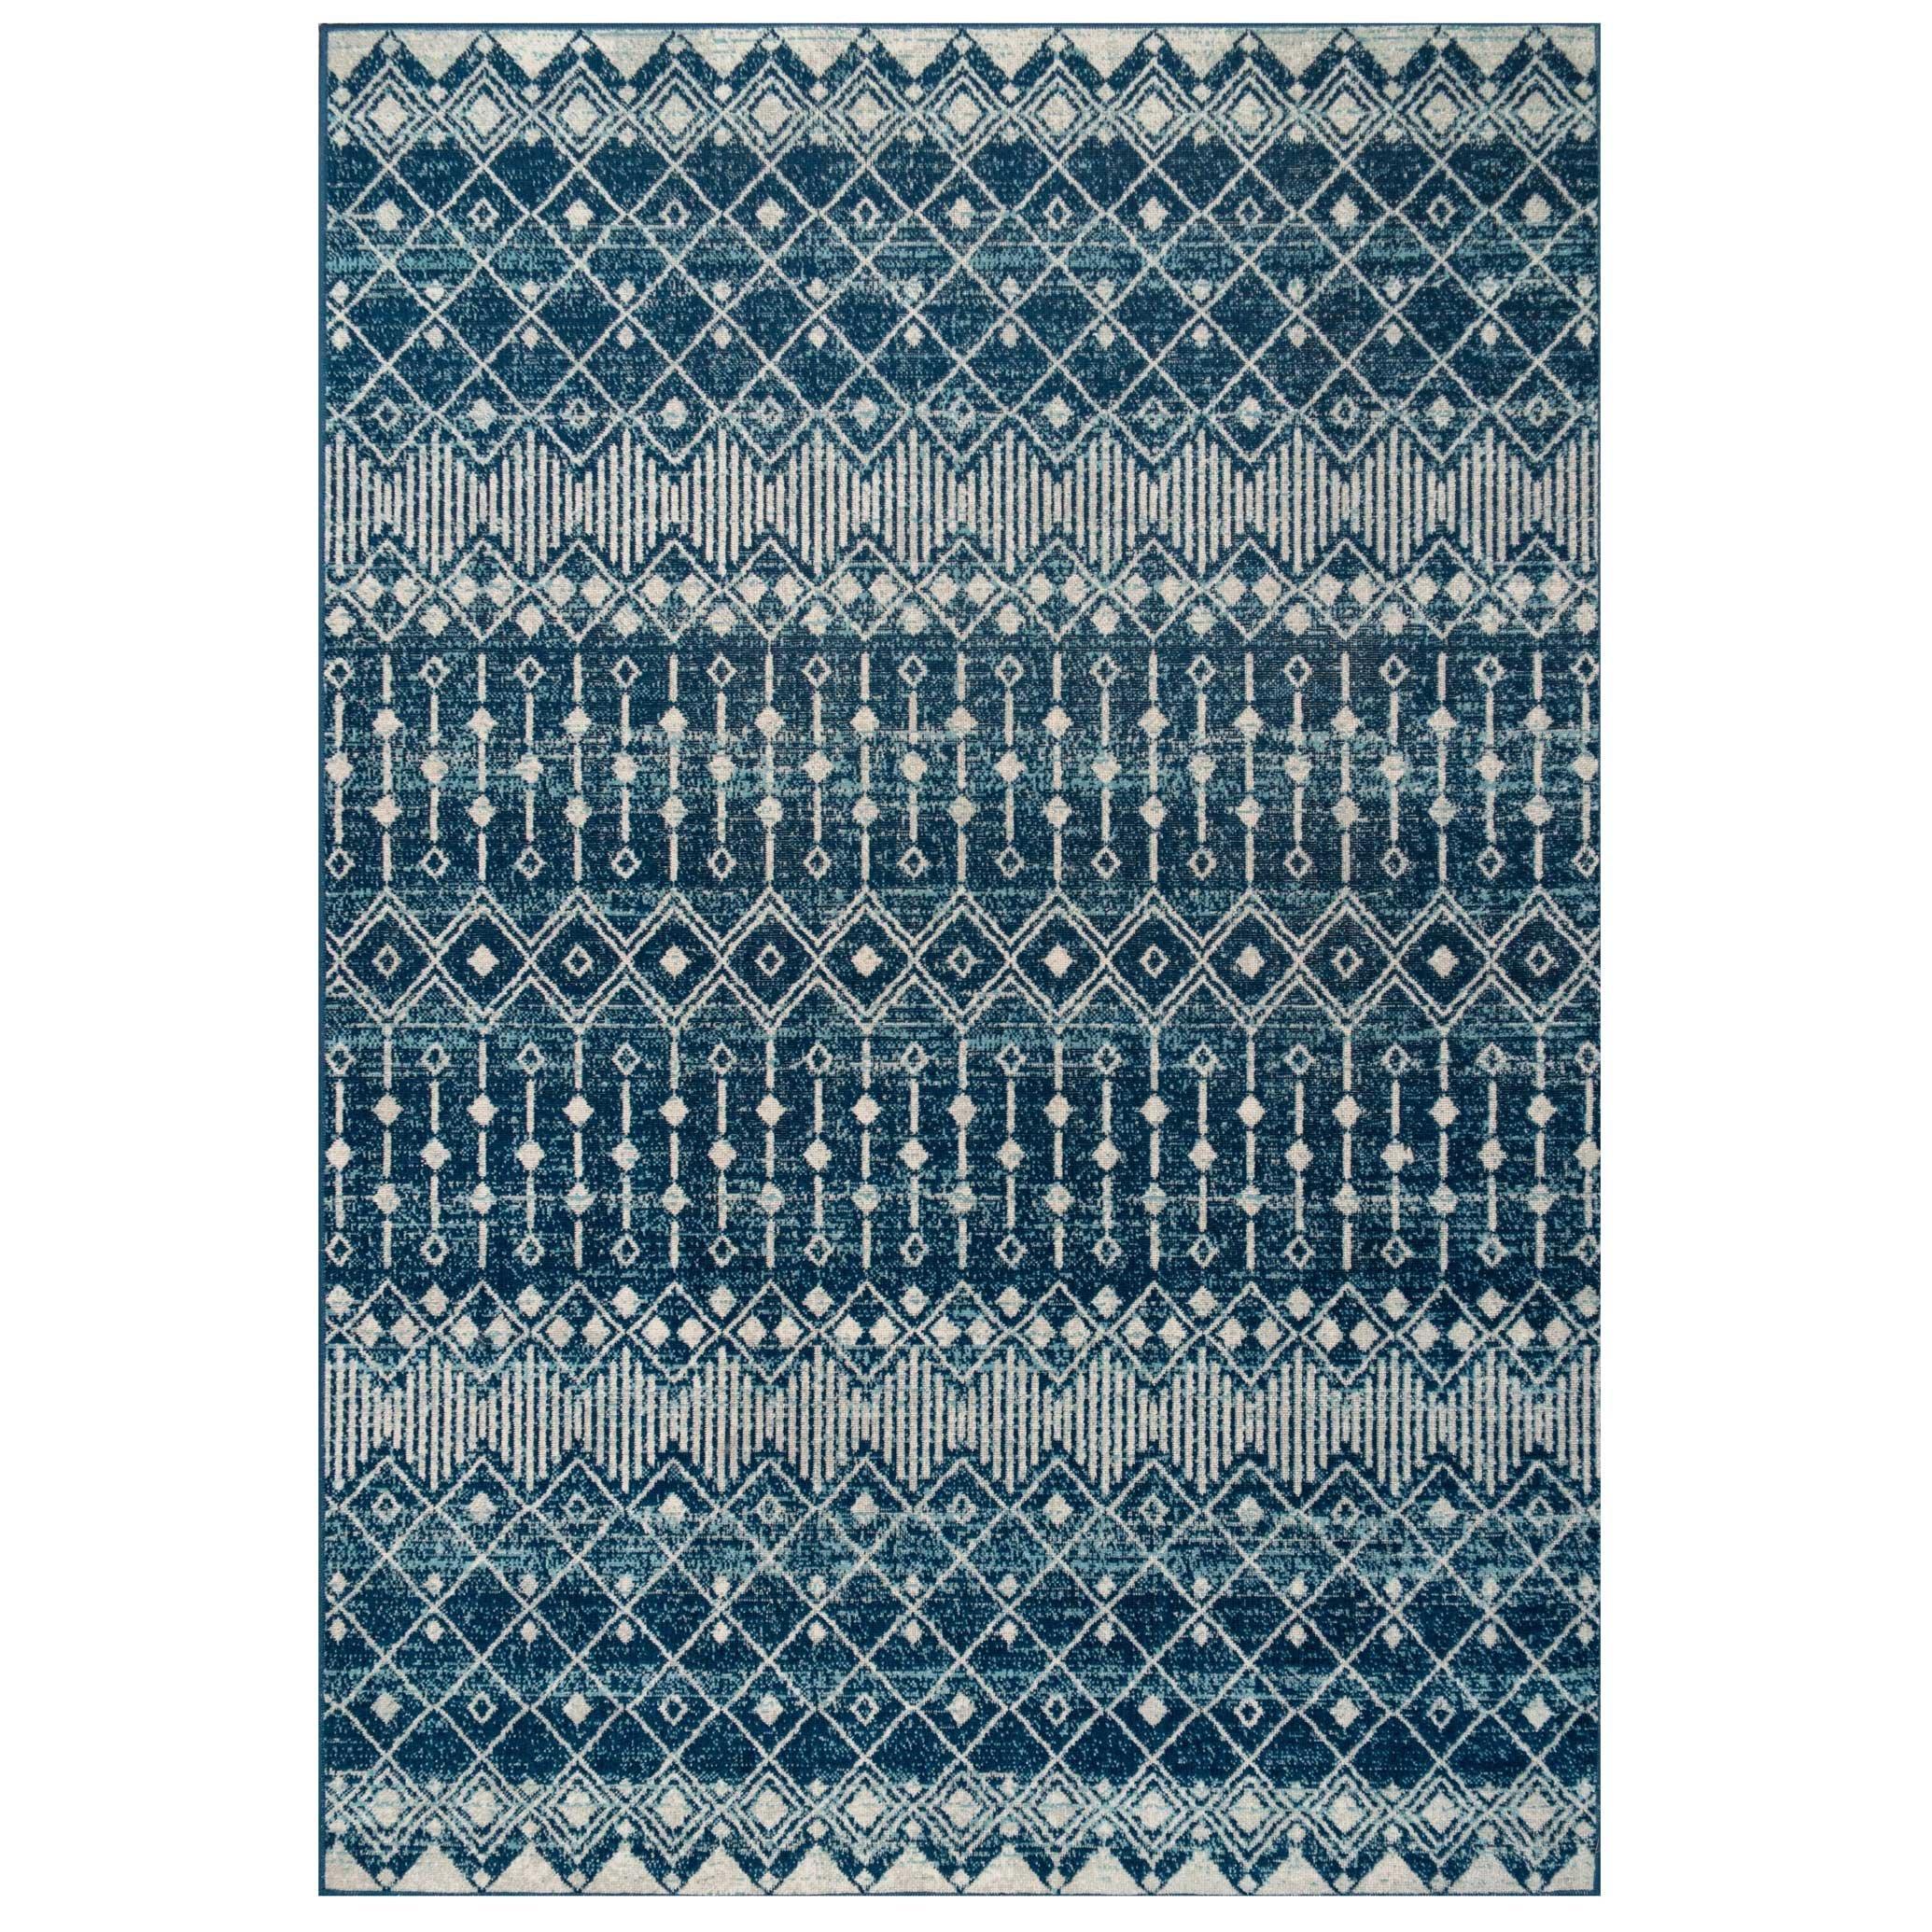 Navy Blue Aztec Pattern Distressed Low Pile Area Rug